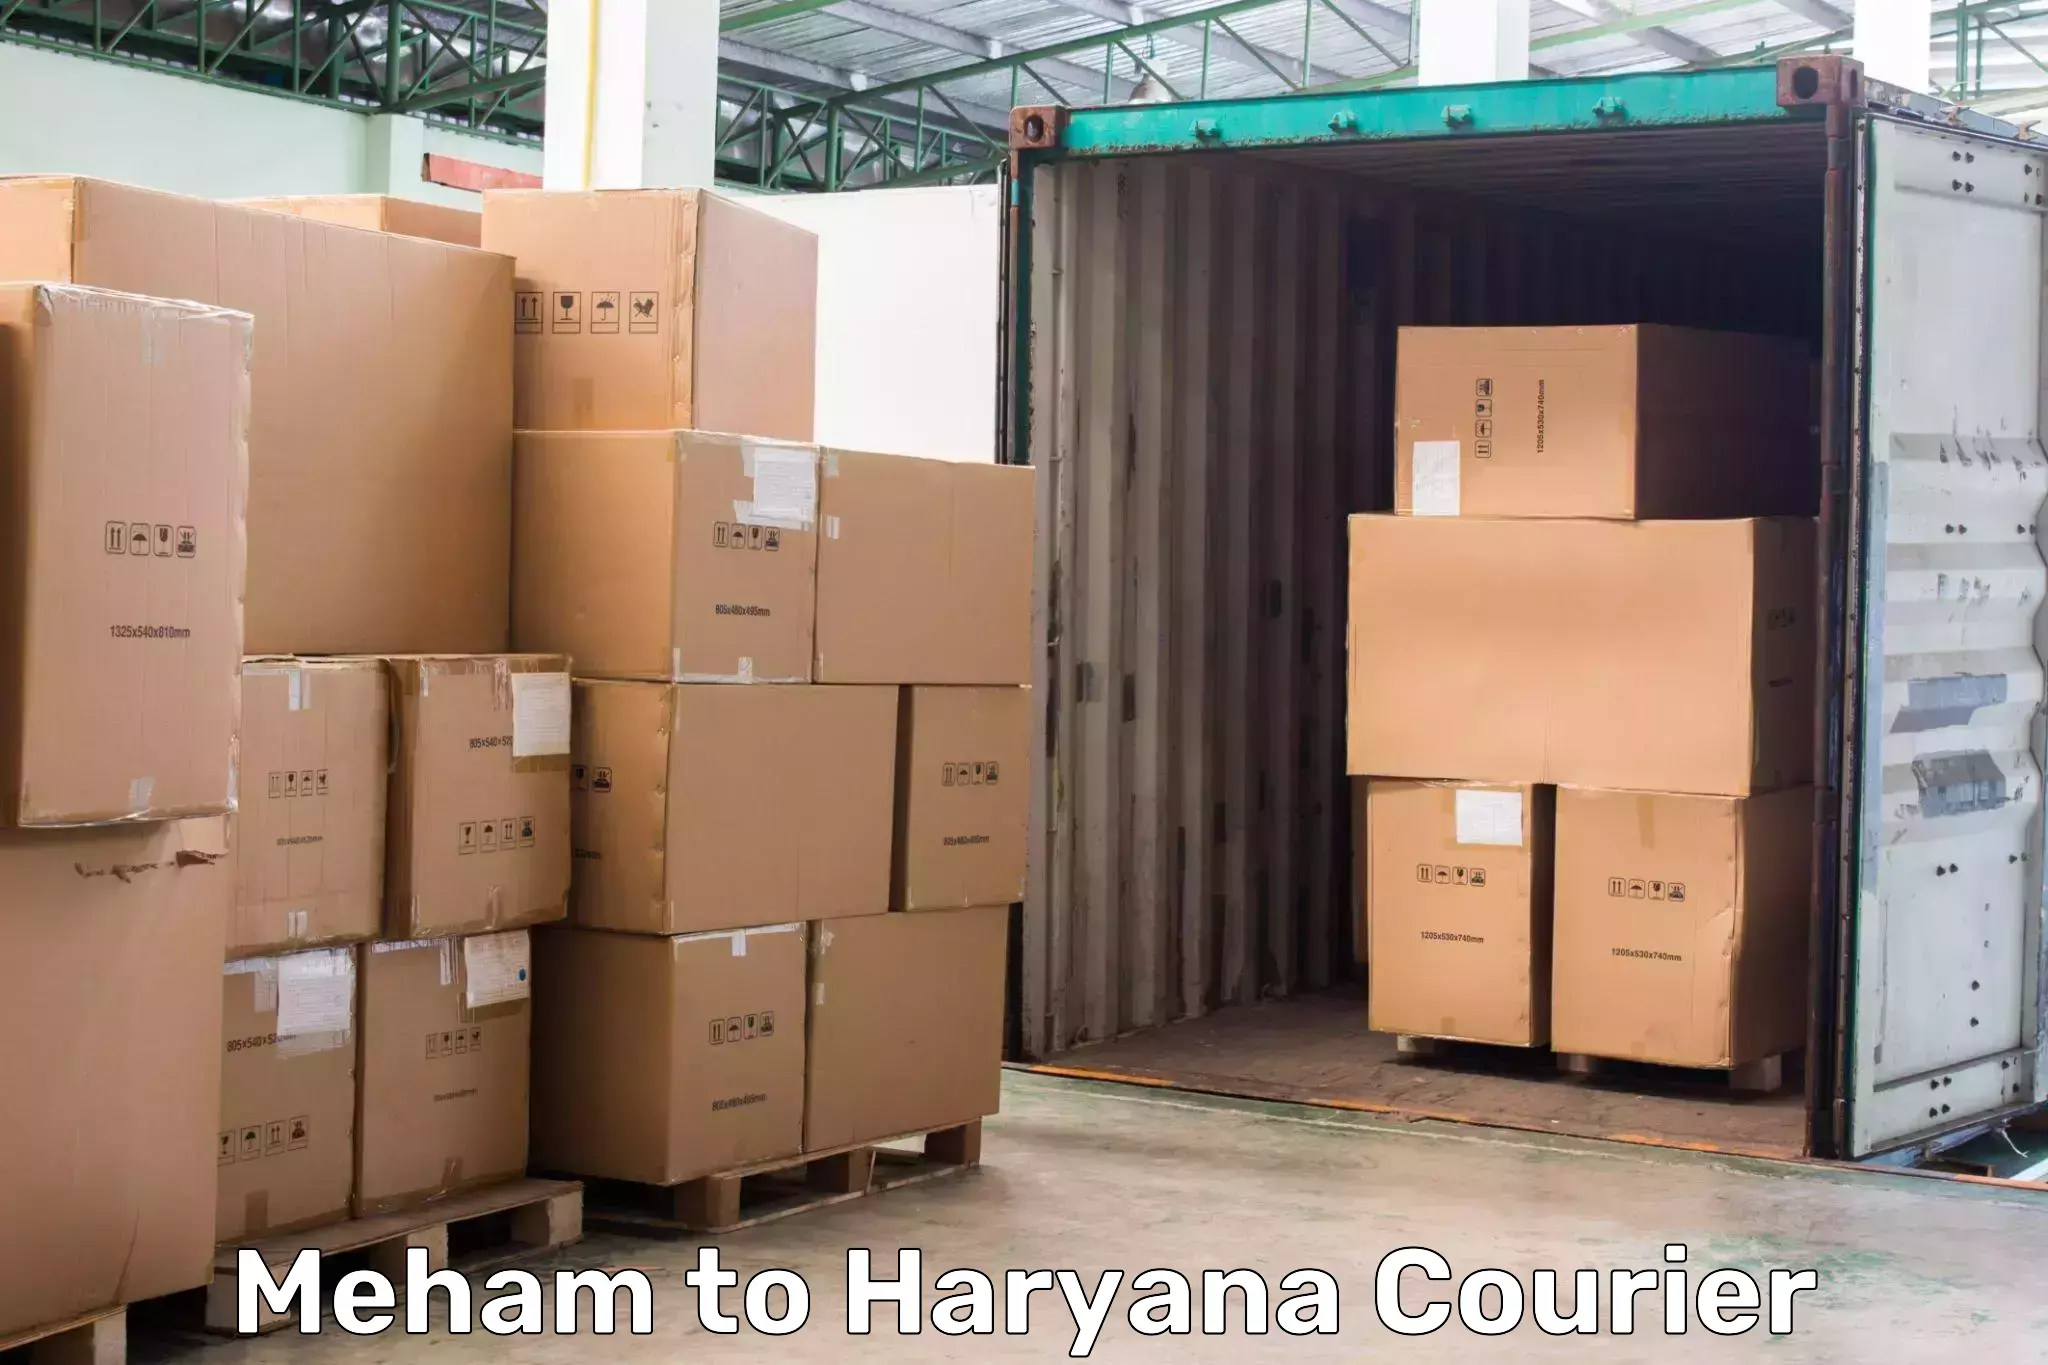 24/7 shipping services in Meham to Chirya